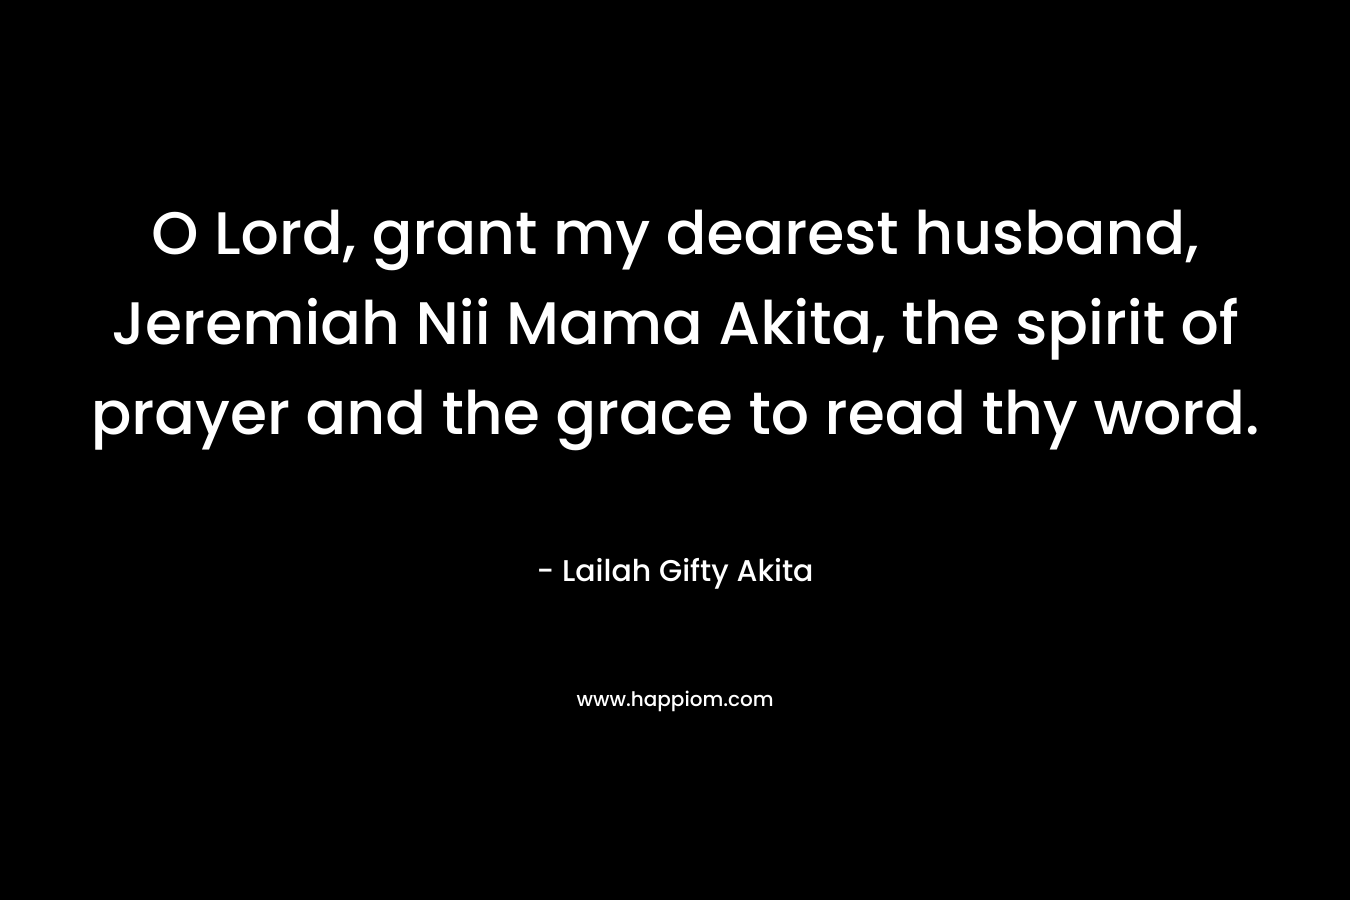 O Lord, grant my dearest husband, Jeremiah Nii Mama Akita, the spirit of prayer and the grace to read thy word.